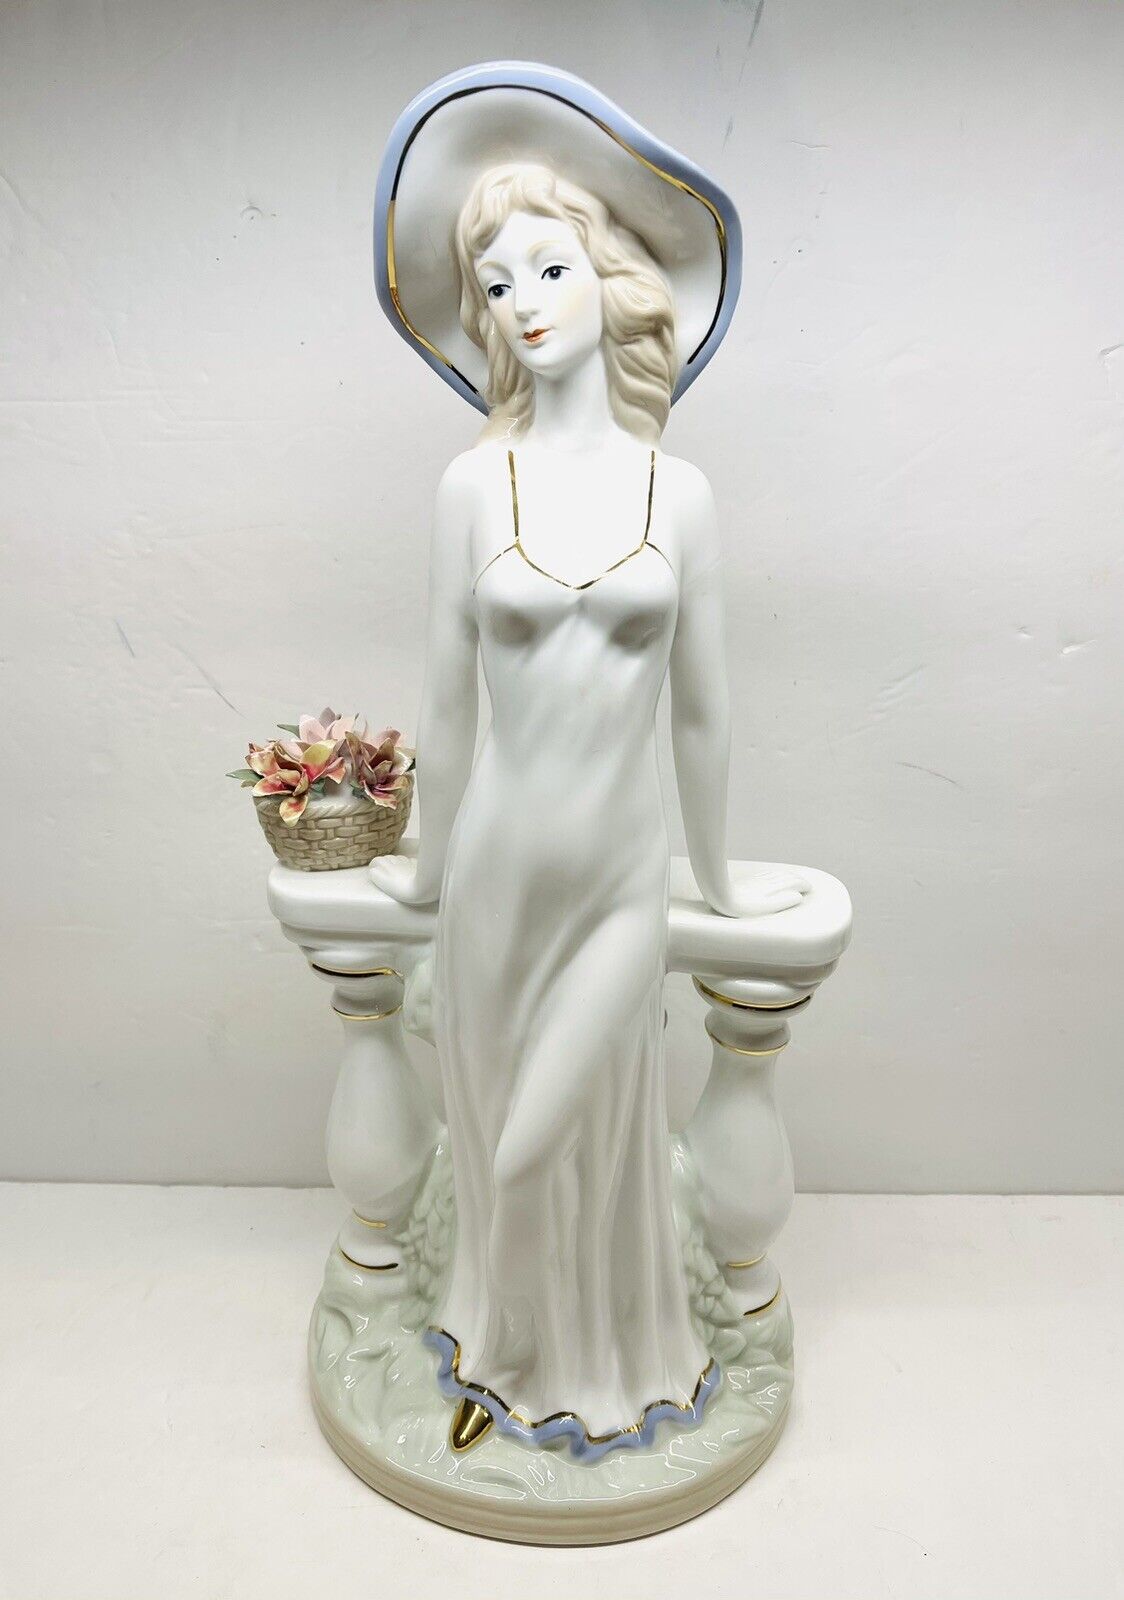 Vintage PMI Porcelain Figure Lady In White Hand Crafted in Germany 18.5” Limited